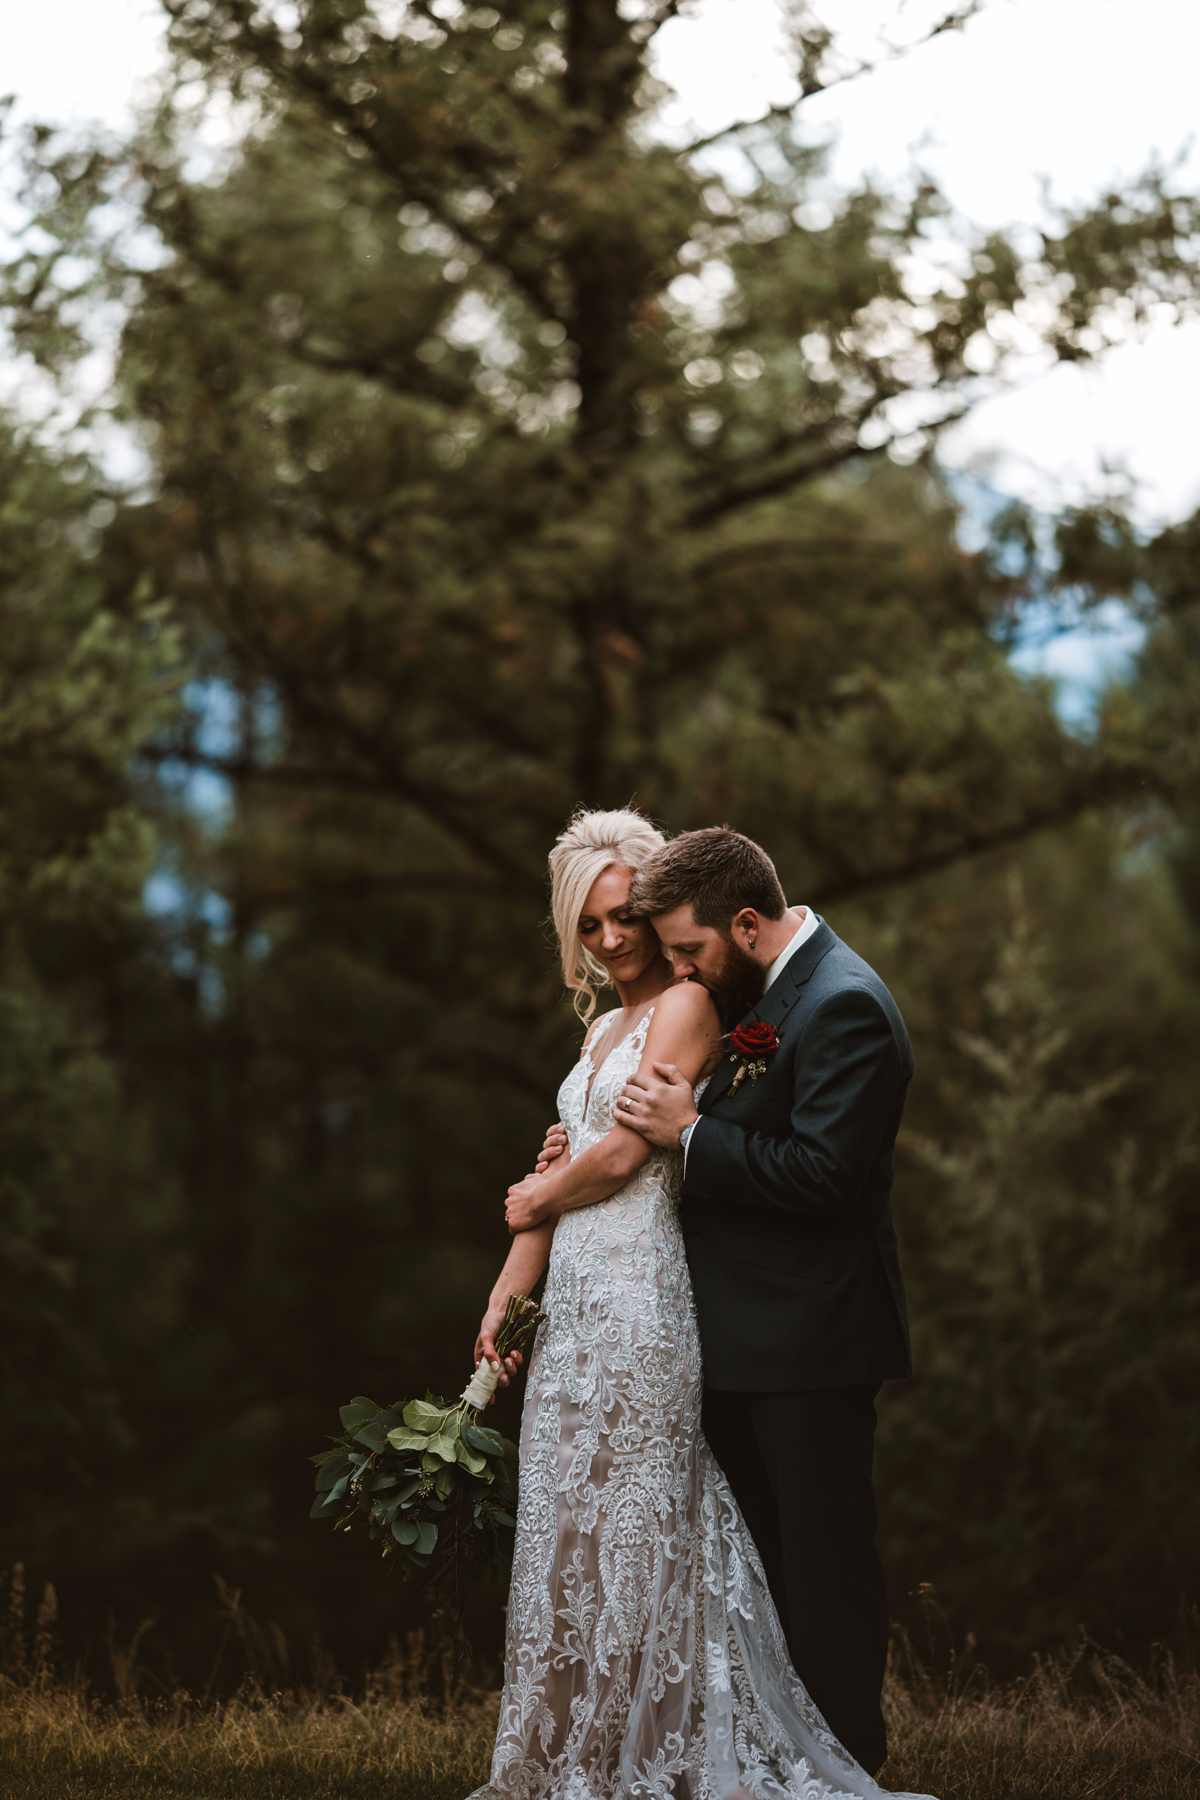 Calgary wedding photographer in Invermere for adventurous mountain destination elopement at Eagle Ranch Golf Resort, British Columbia - Image 36